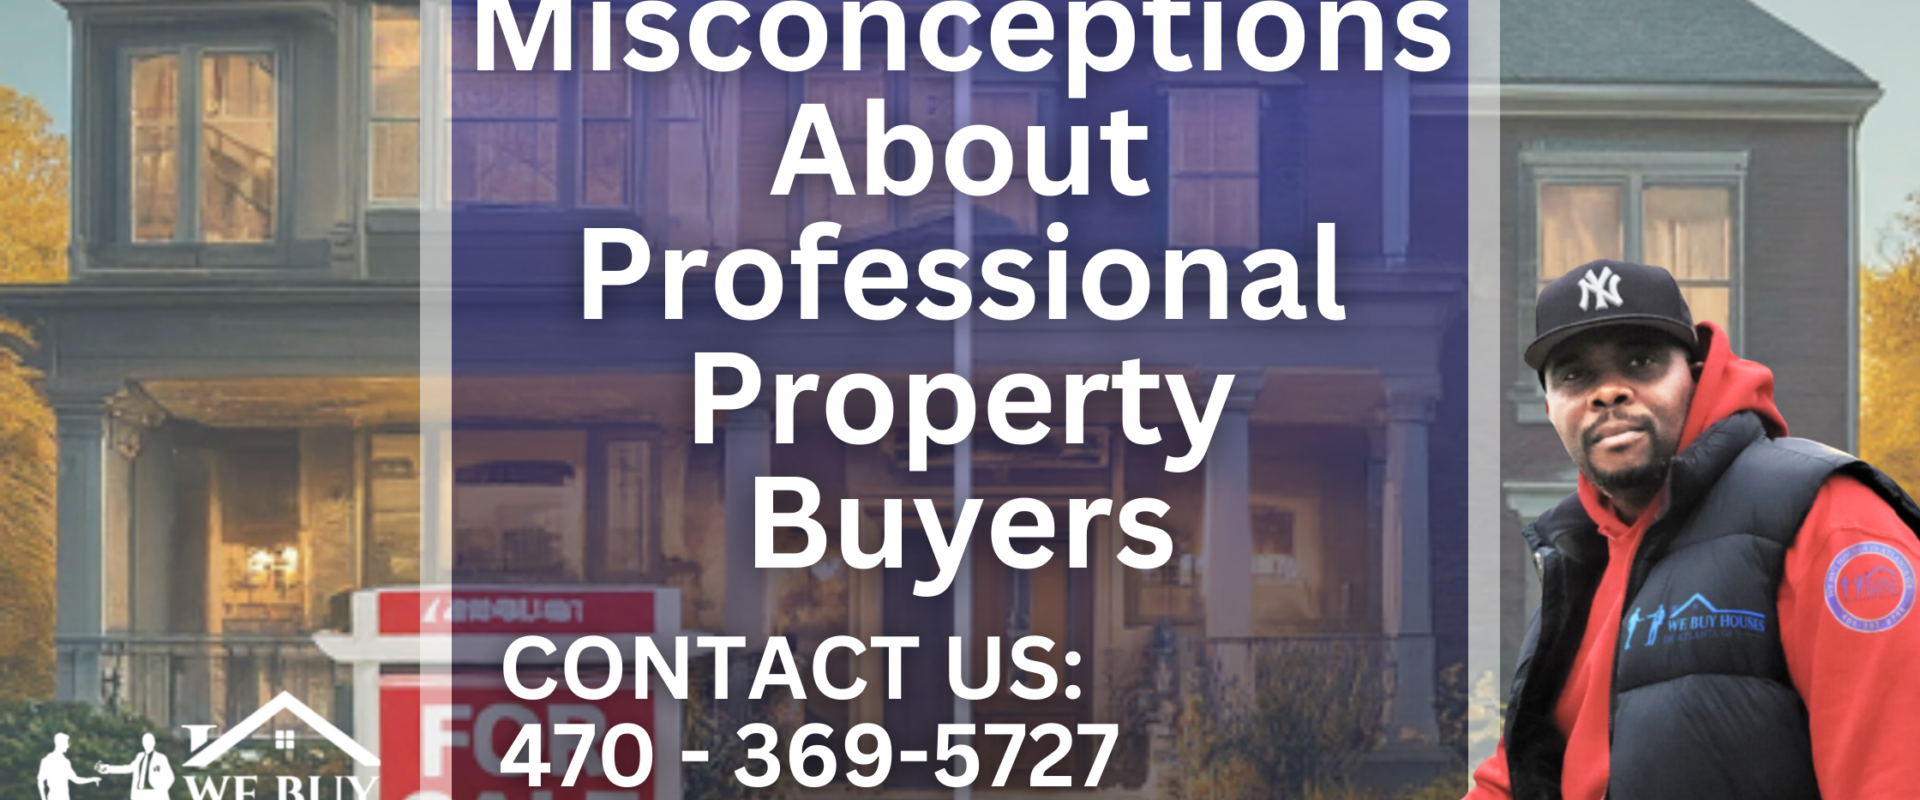 5 Common Misconceptions About Professional Property Buyers (1)